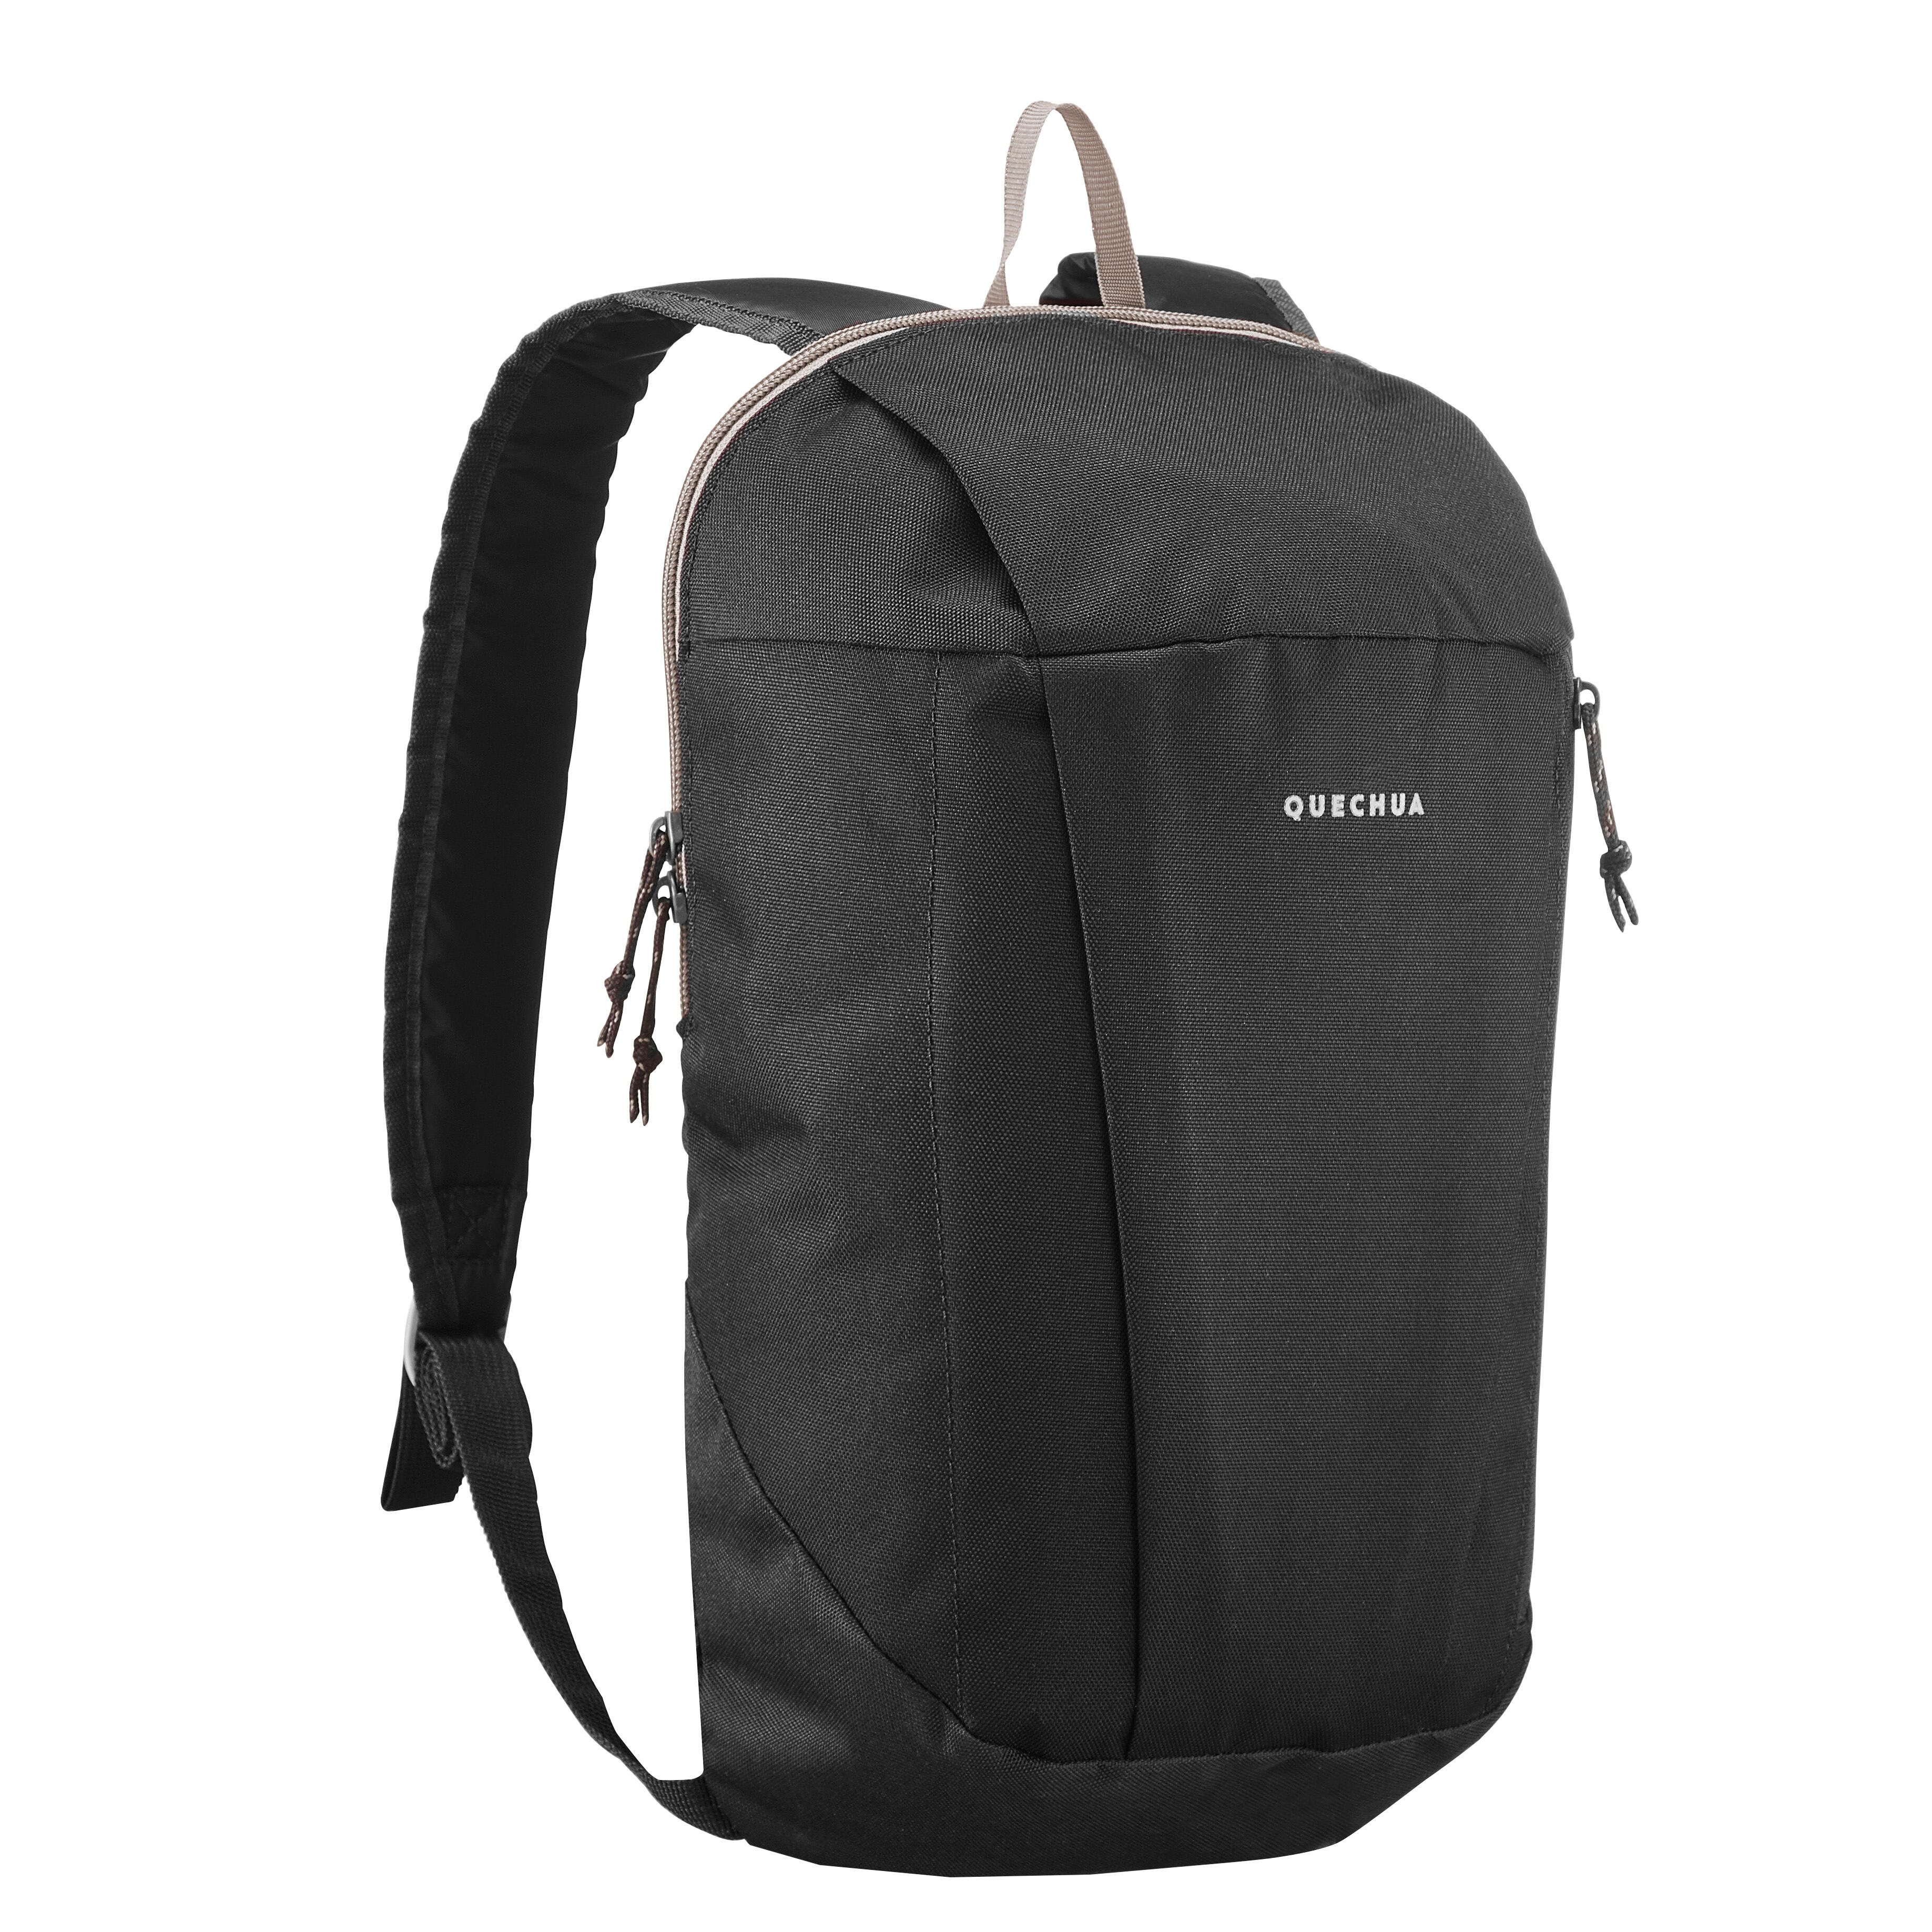 Country walking backpack - NH100 10 litres